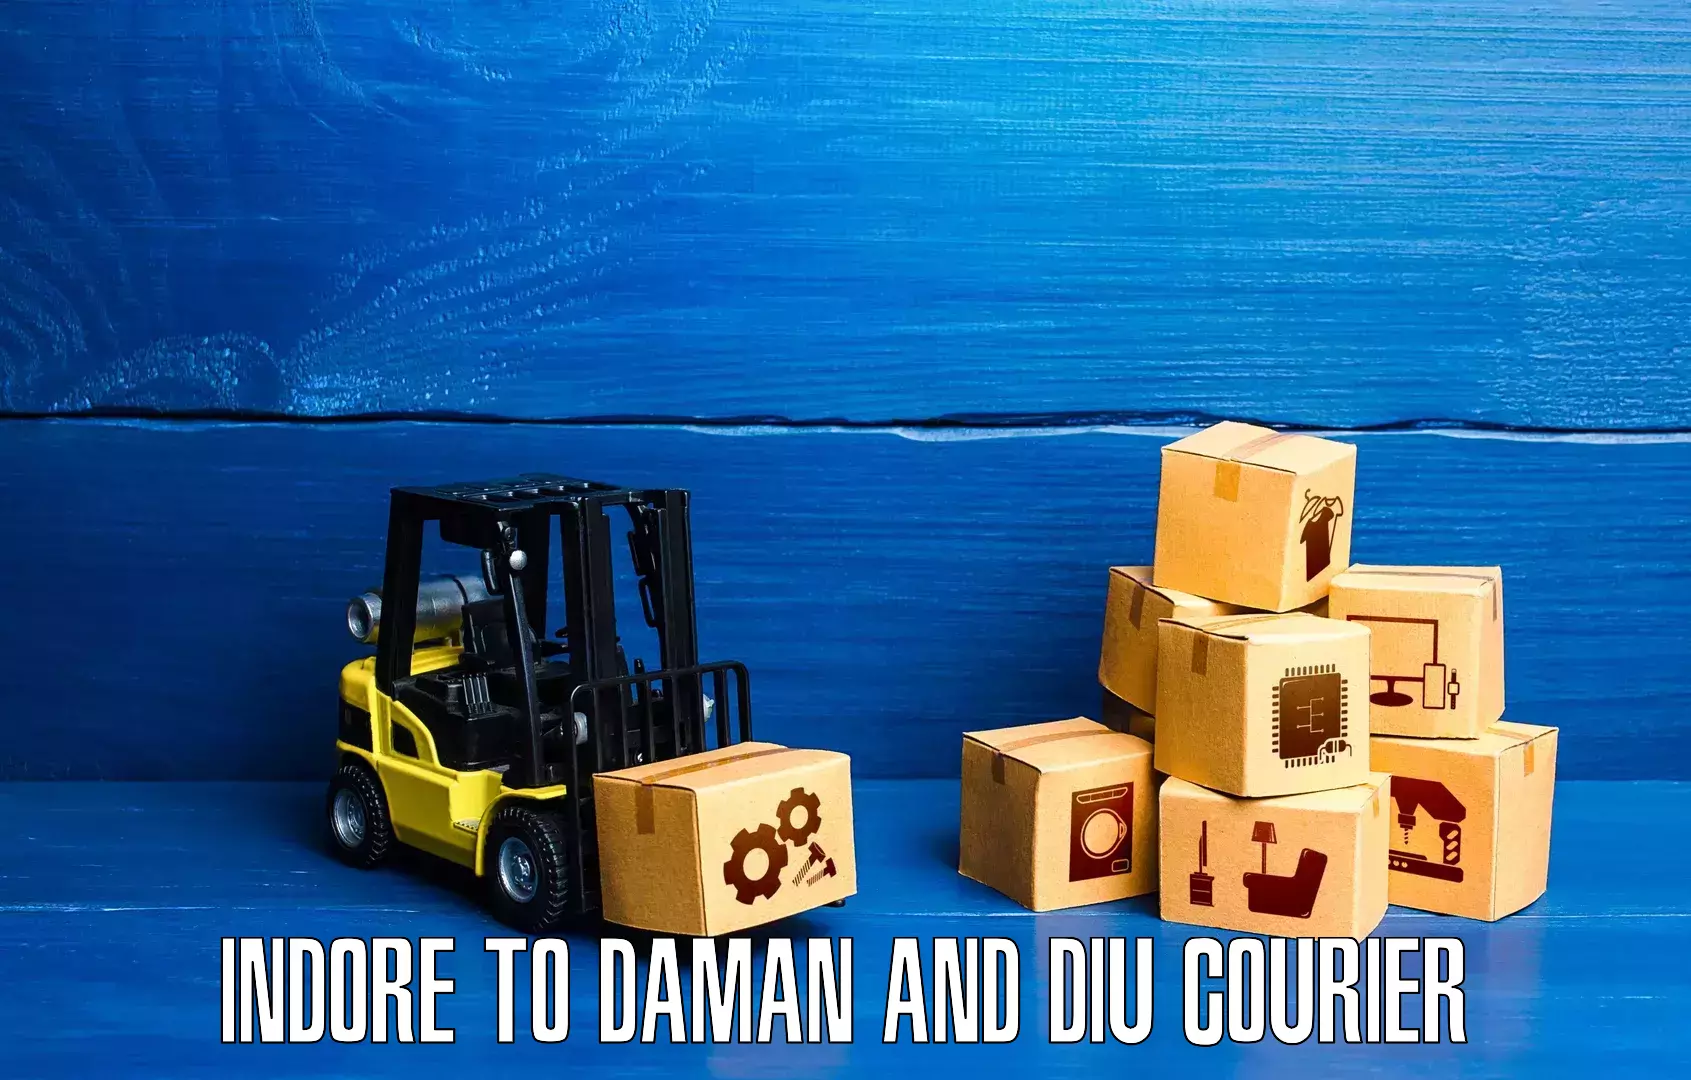 Delivery service partnership Indore to Daman and Diu